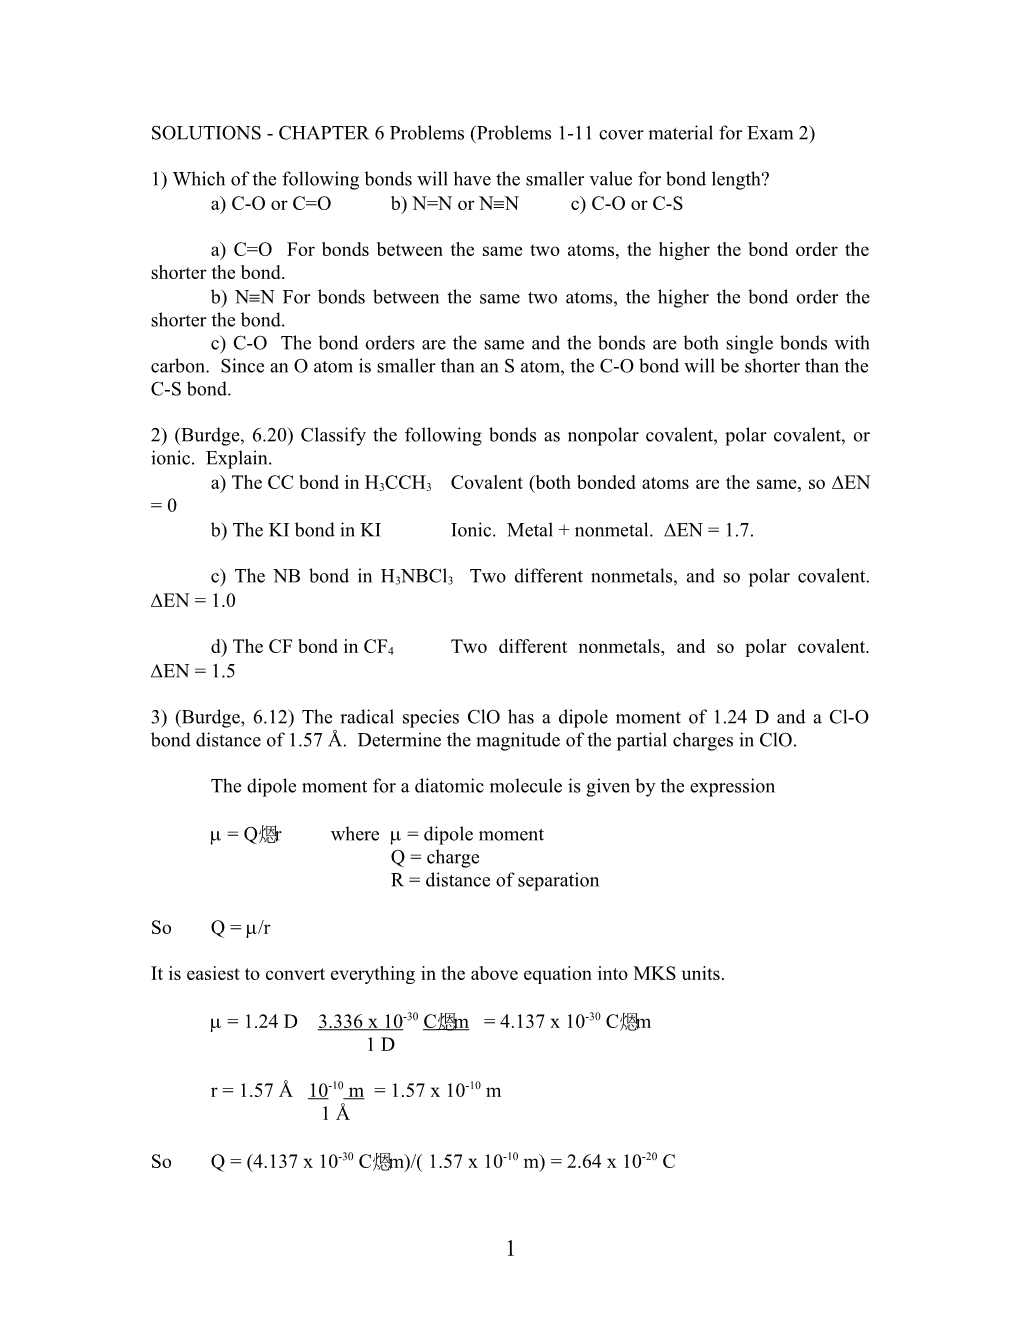 SOLUTIONS - CHAPTER 6 Problems (Problems 1-11 Cover Material for Exam 2)